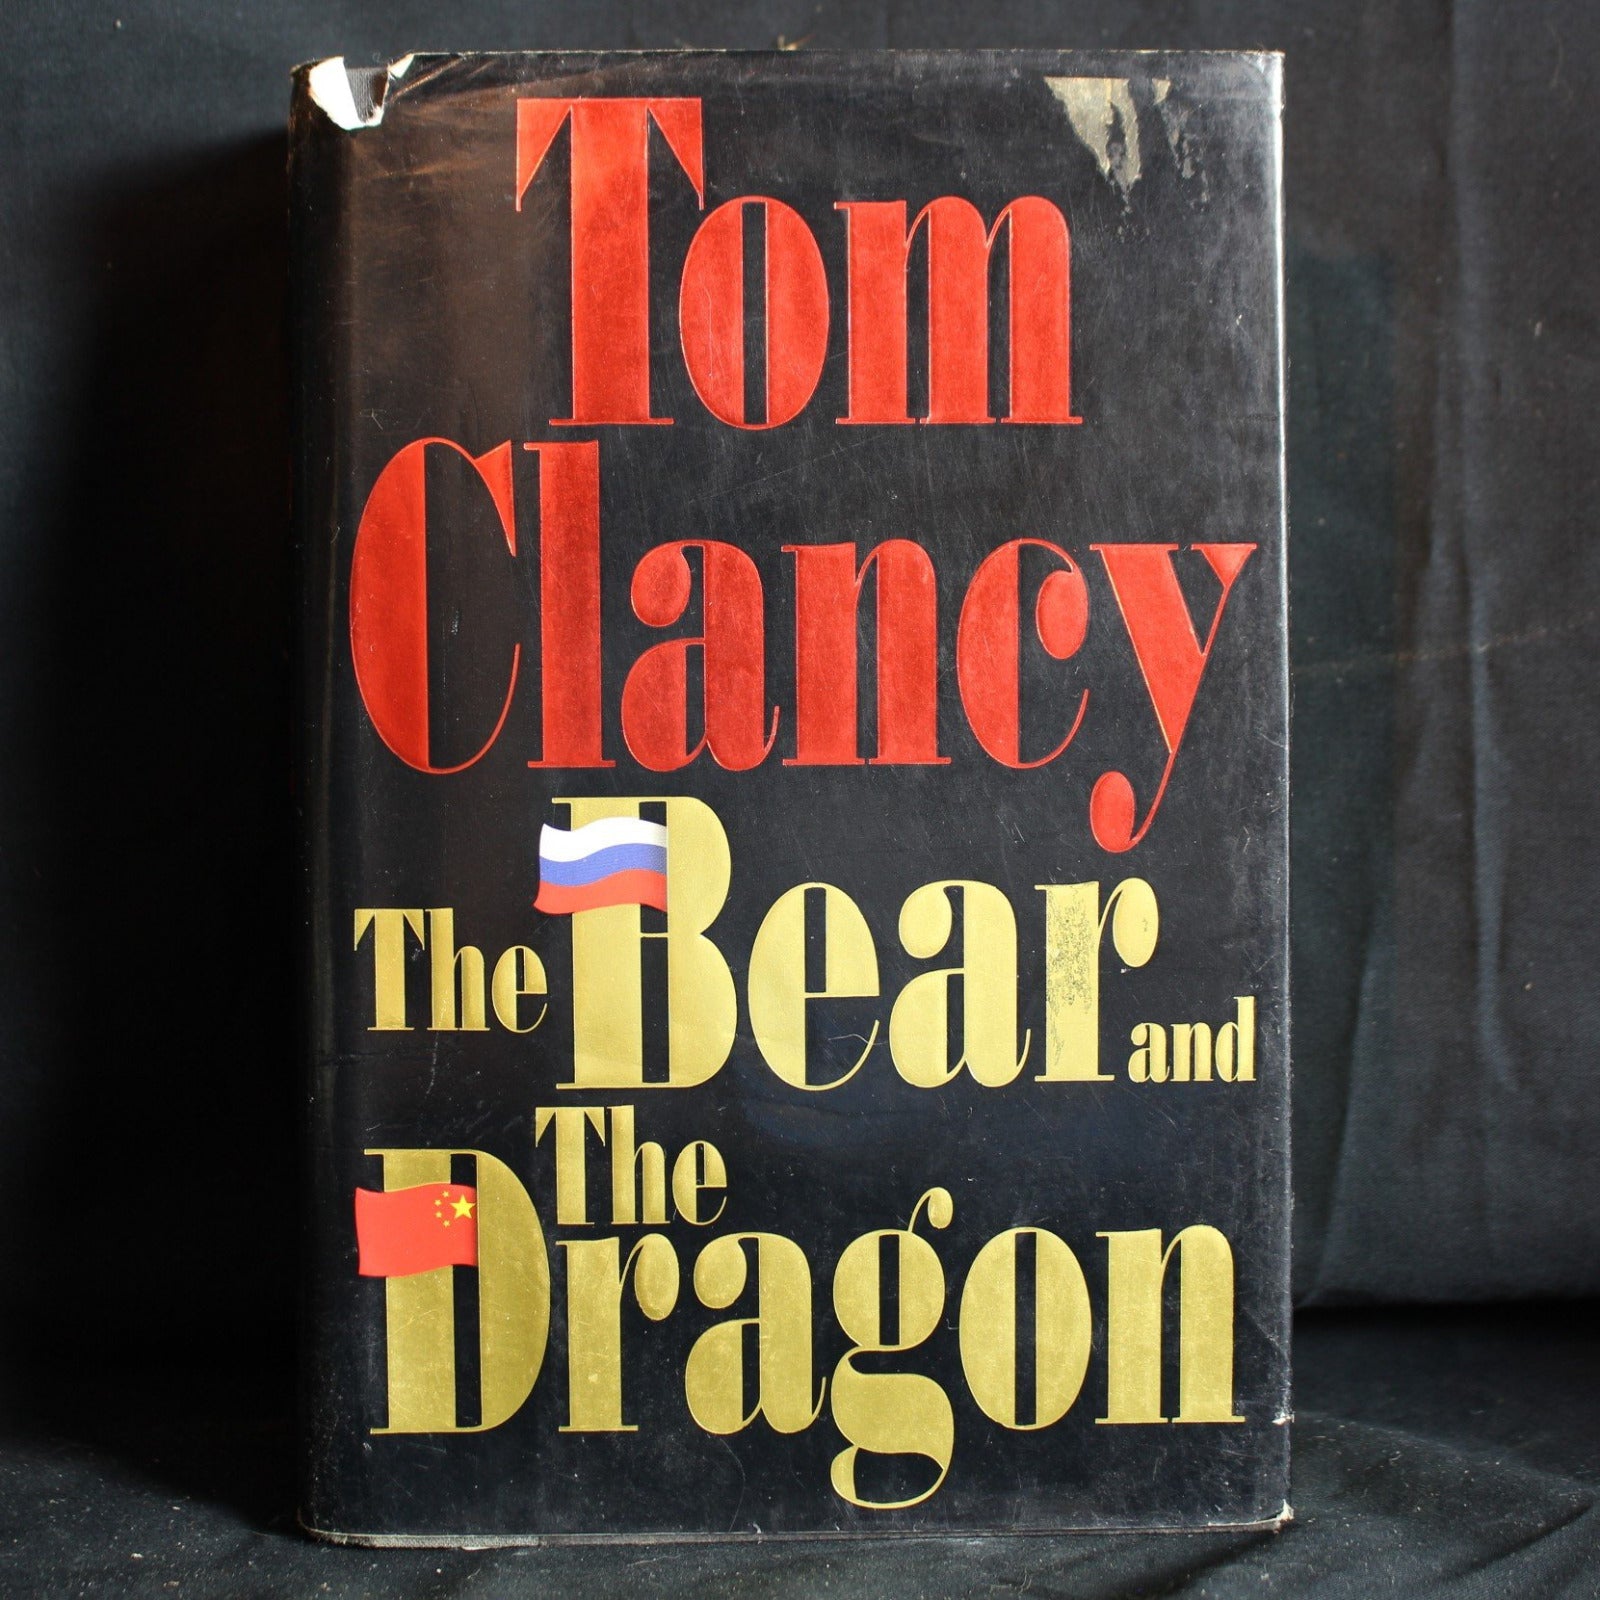 Hardcover First Edition The Bear and the Dragon by Tom Clancy, 2000